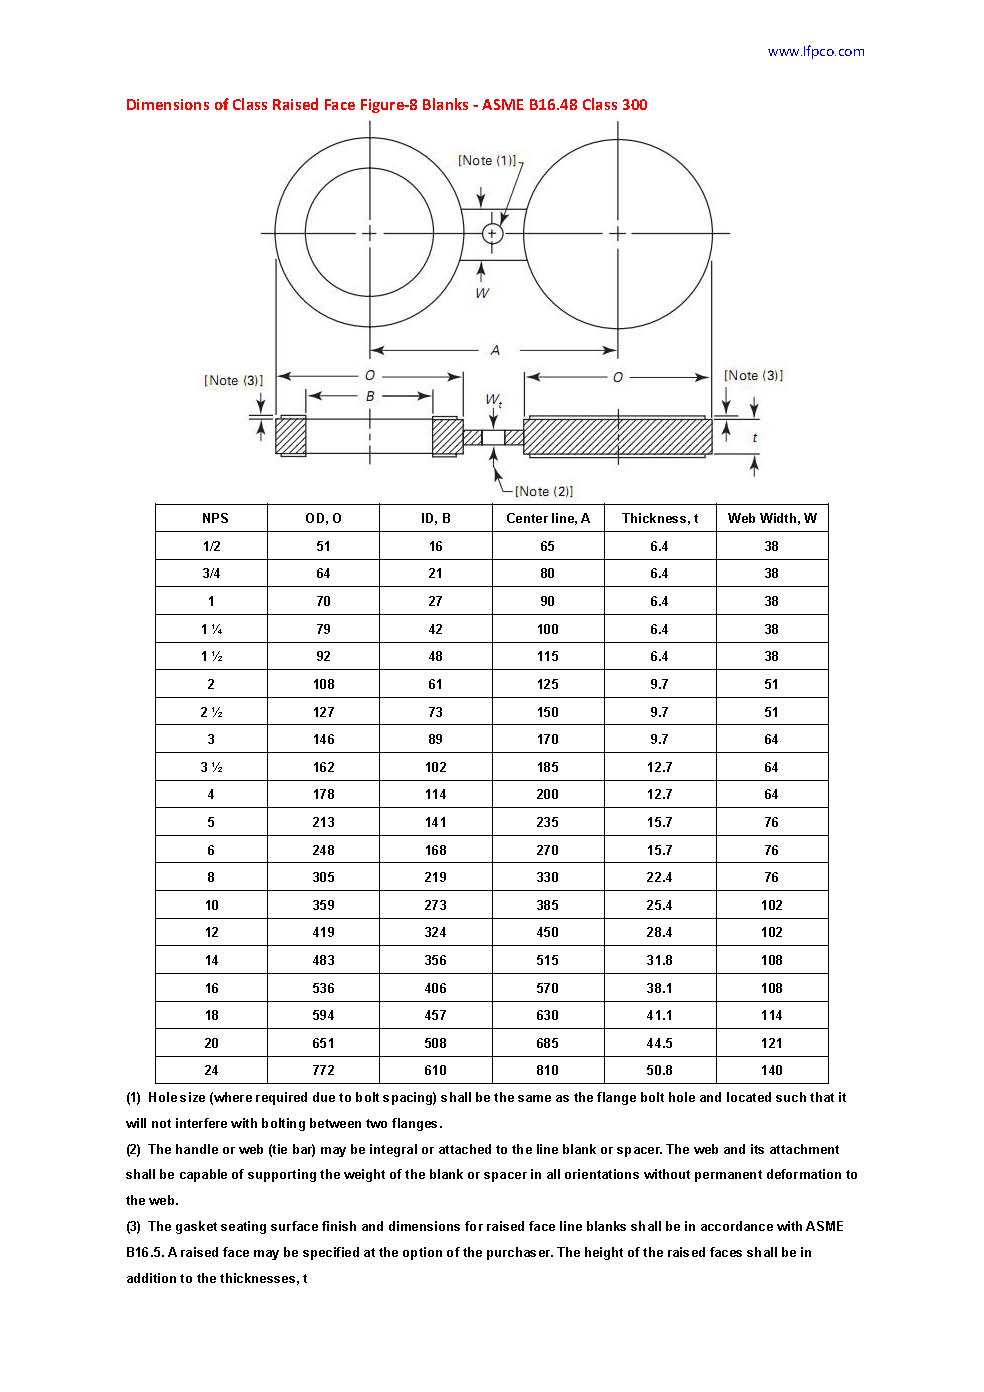 Dimensions of raised face figure 8 blanks ASME B16.48_class300